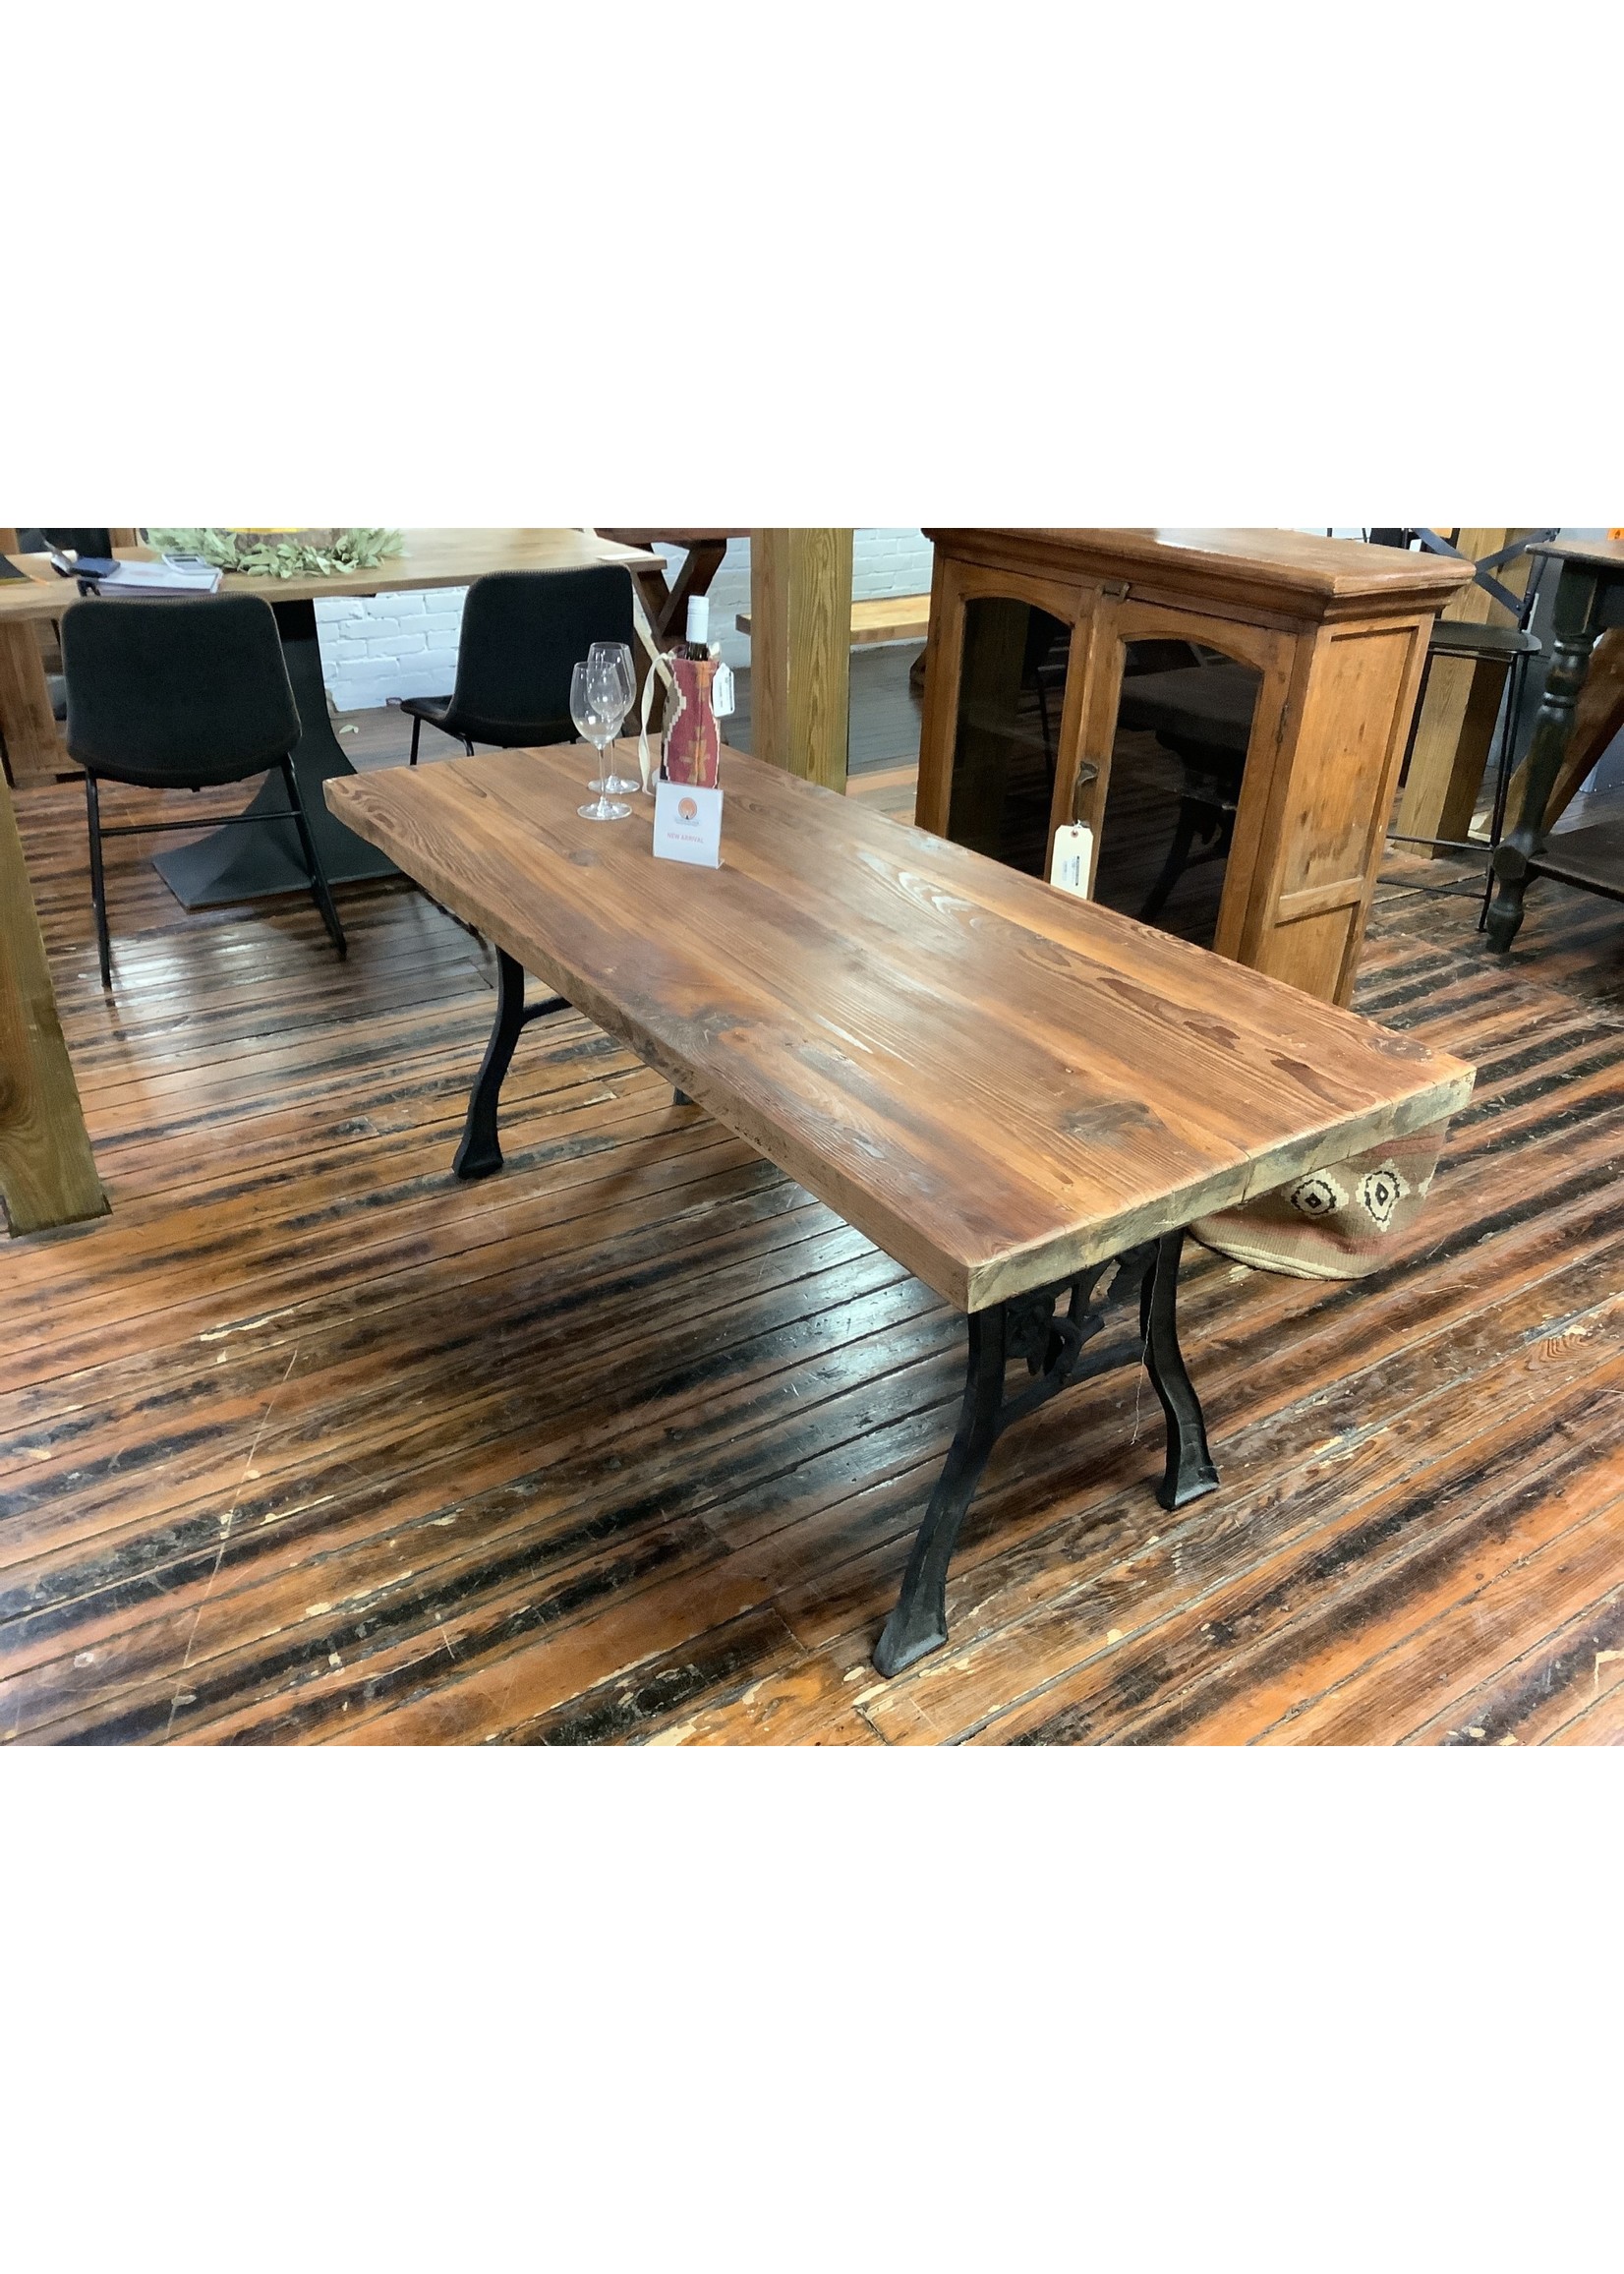 OW Rustic Heart Pine Table Metal Floral Base 24.75” x 54.25” x 28”